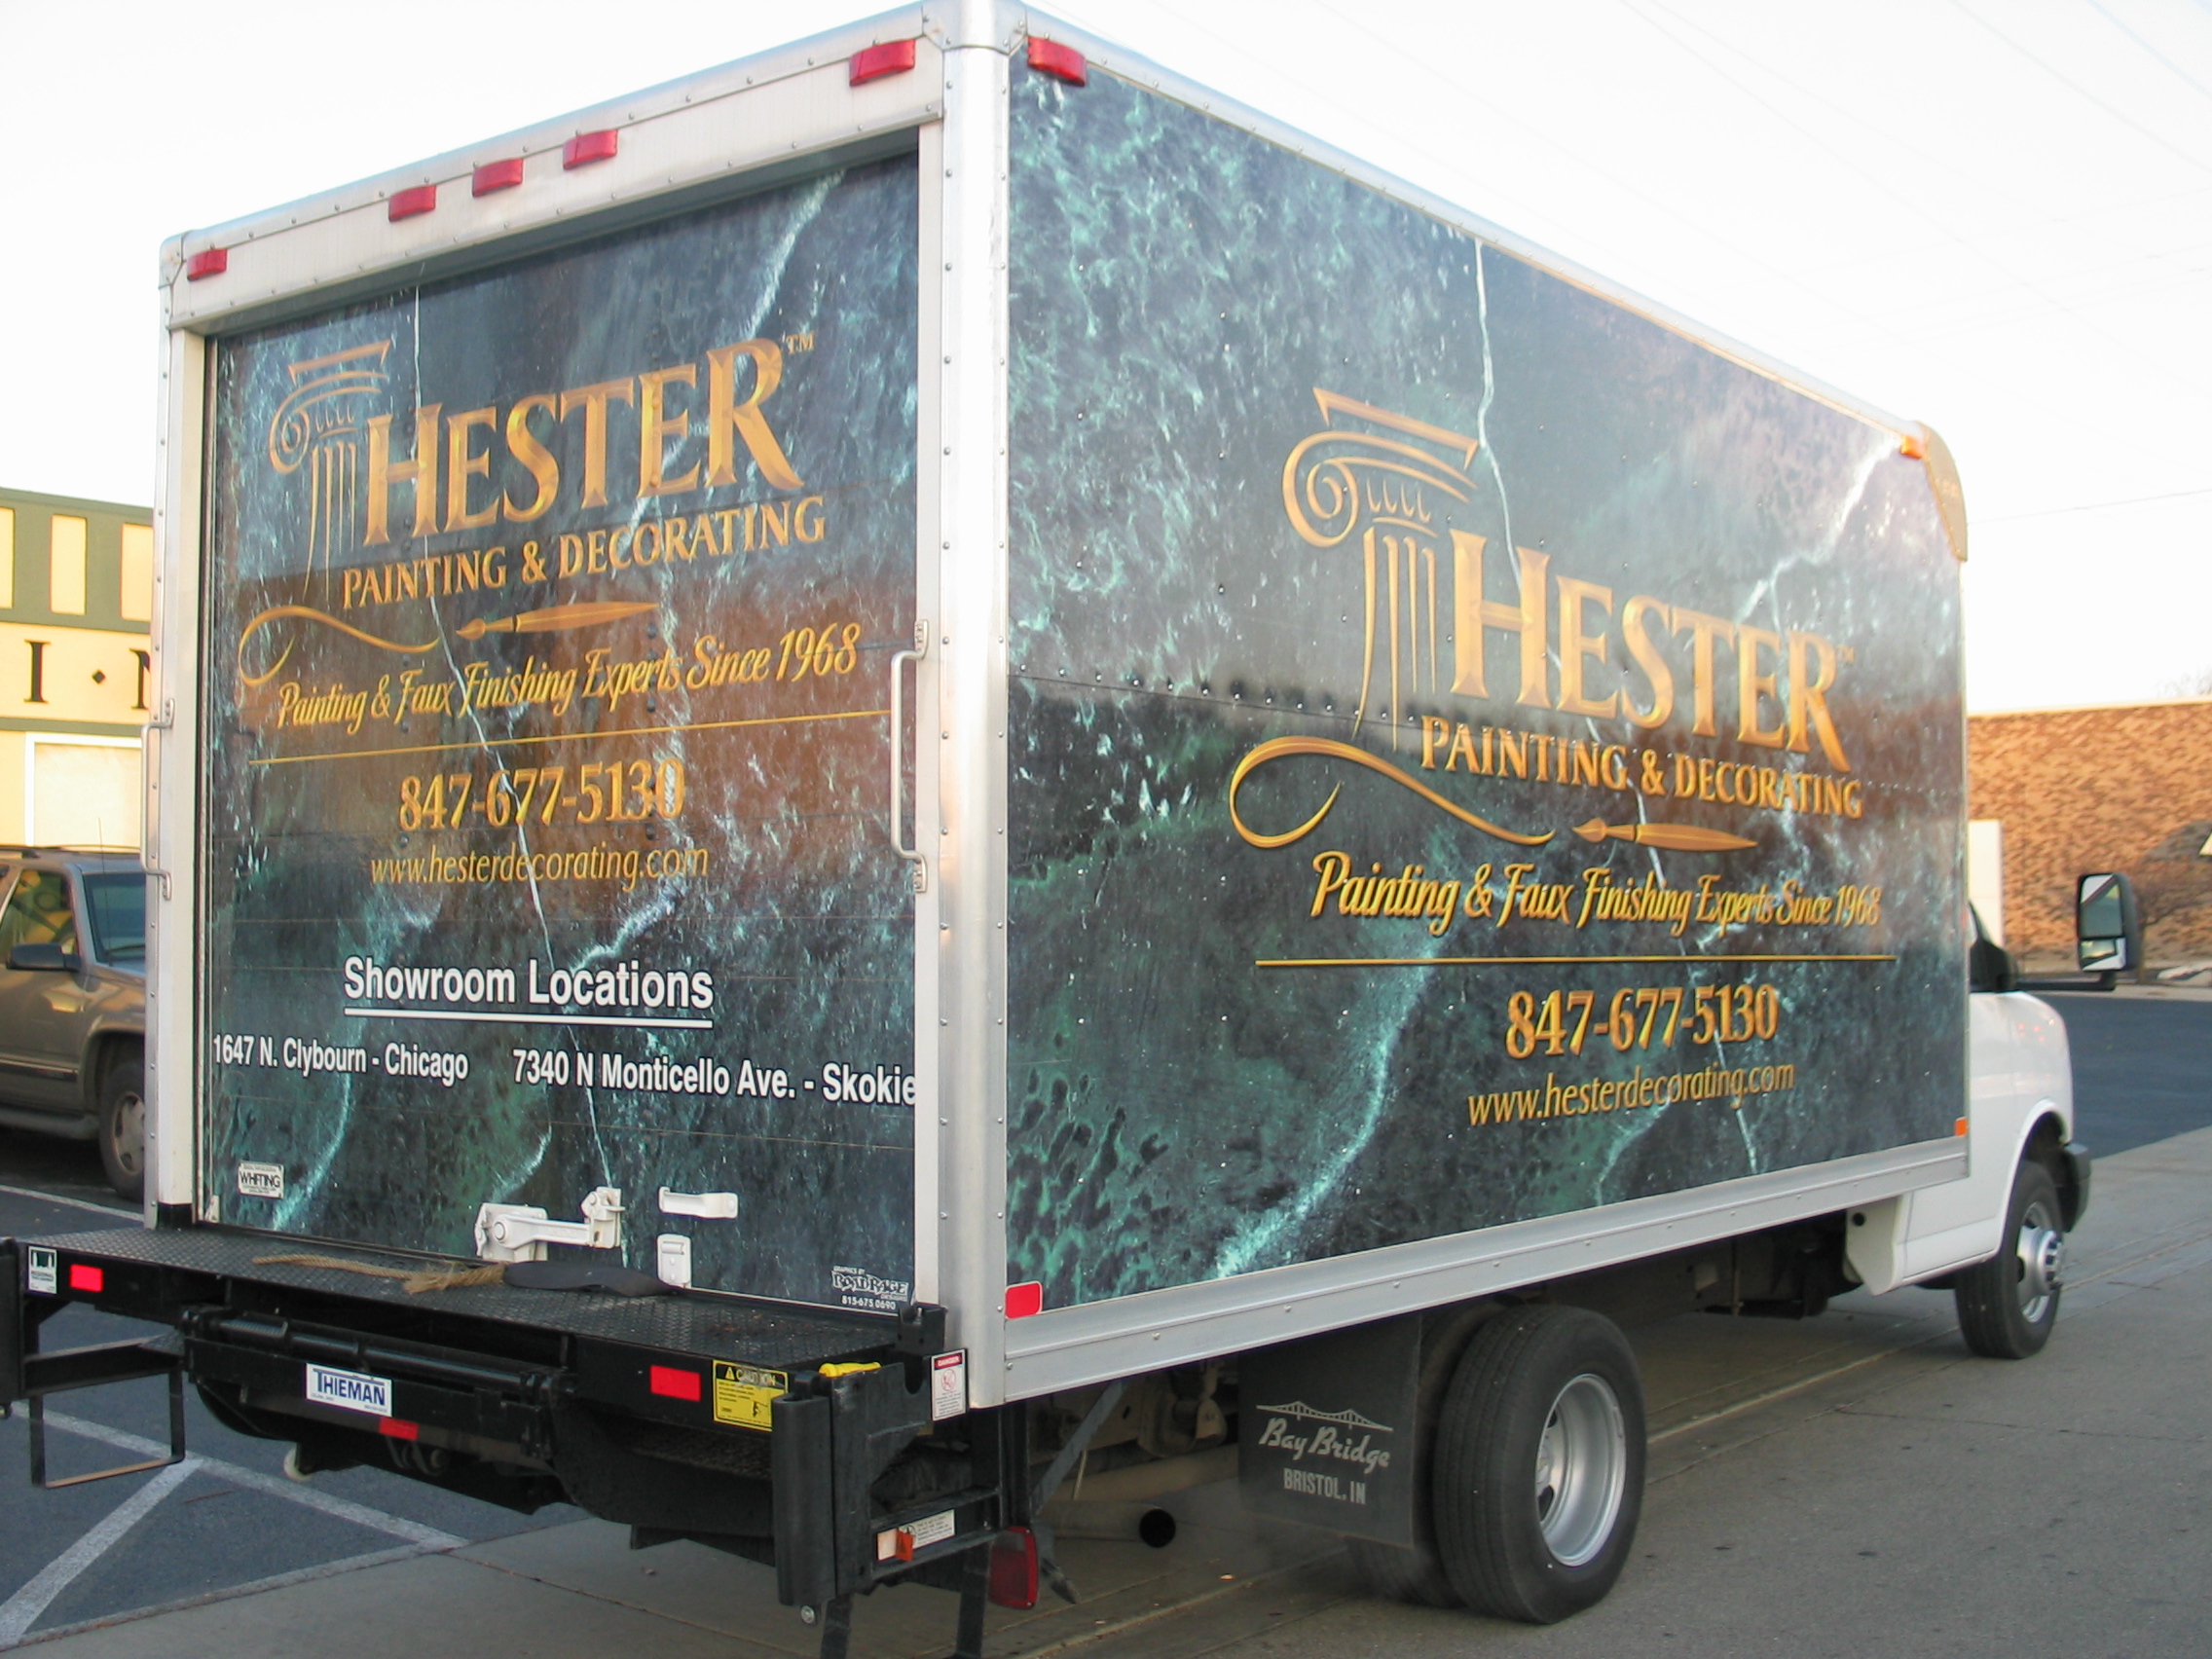 More Distinctive Awards for Hester Painting & Decorating